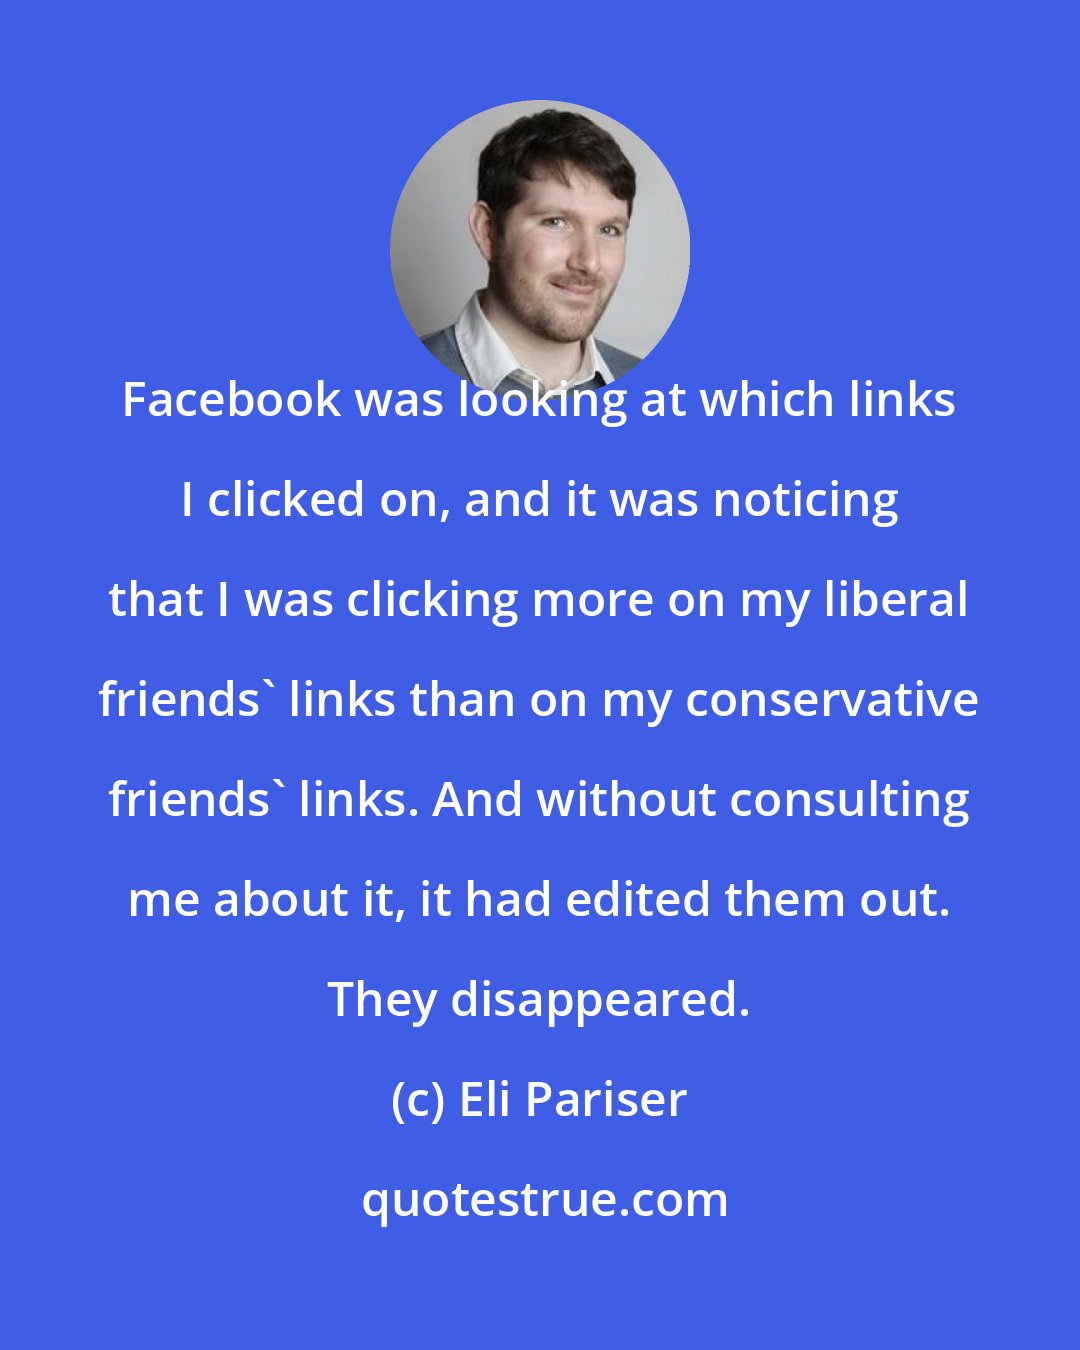 Eli Pariser: Facebook was looking at which links I clicked on, and it was noticing that I was clicking more on my liberal friends' links than on my conservative friends' links. And without consulting me about it, it had edited them out. They disappeared.